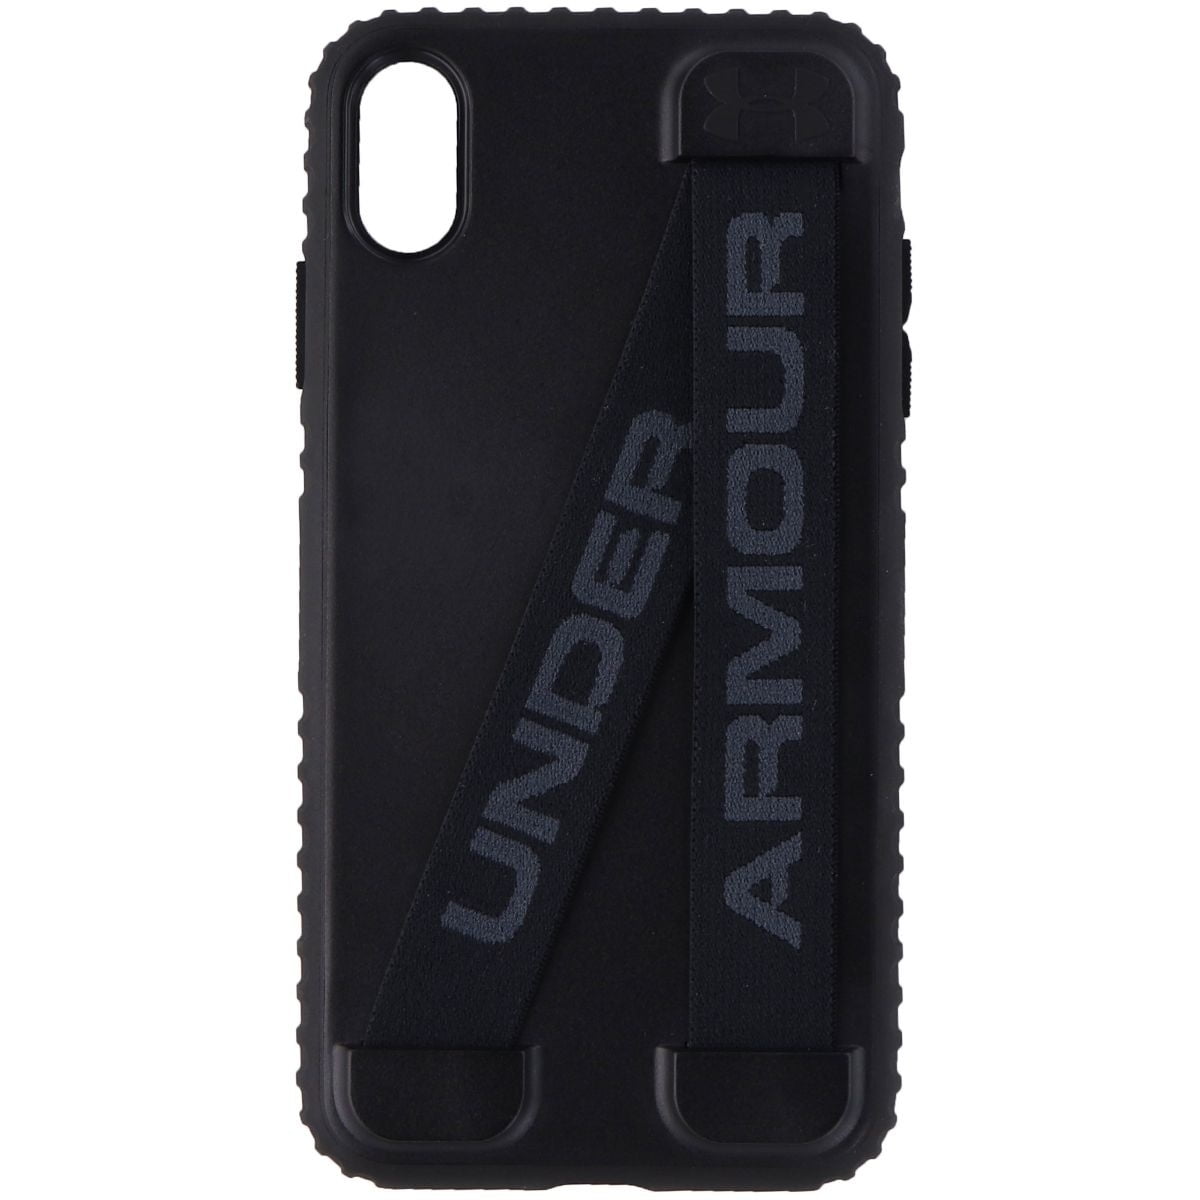 Under Armour Protect Handle-It for XS Max - Black (Refurbished) - Walmart.com